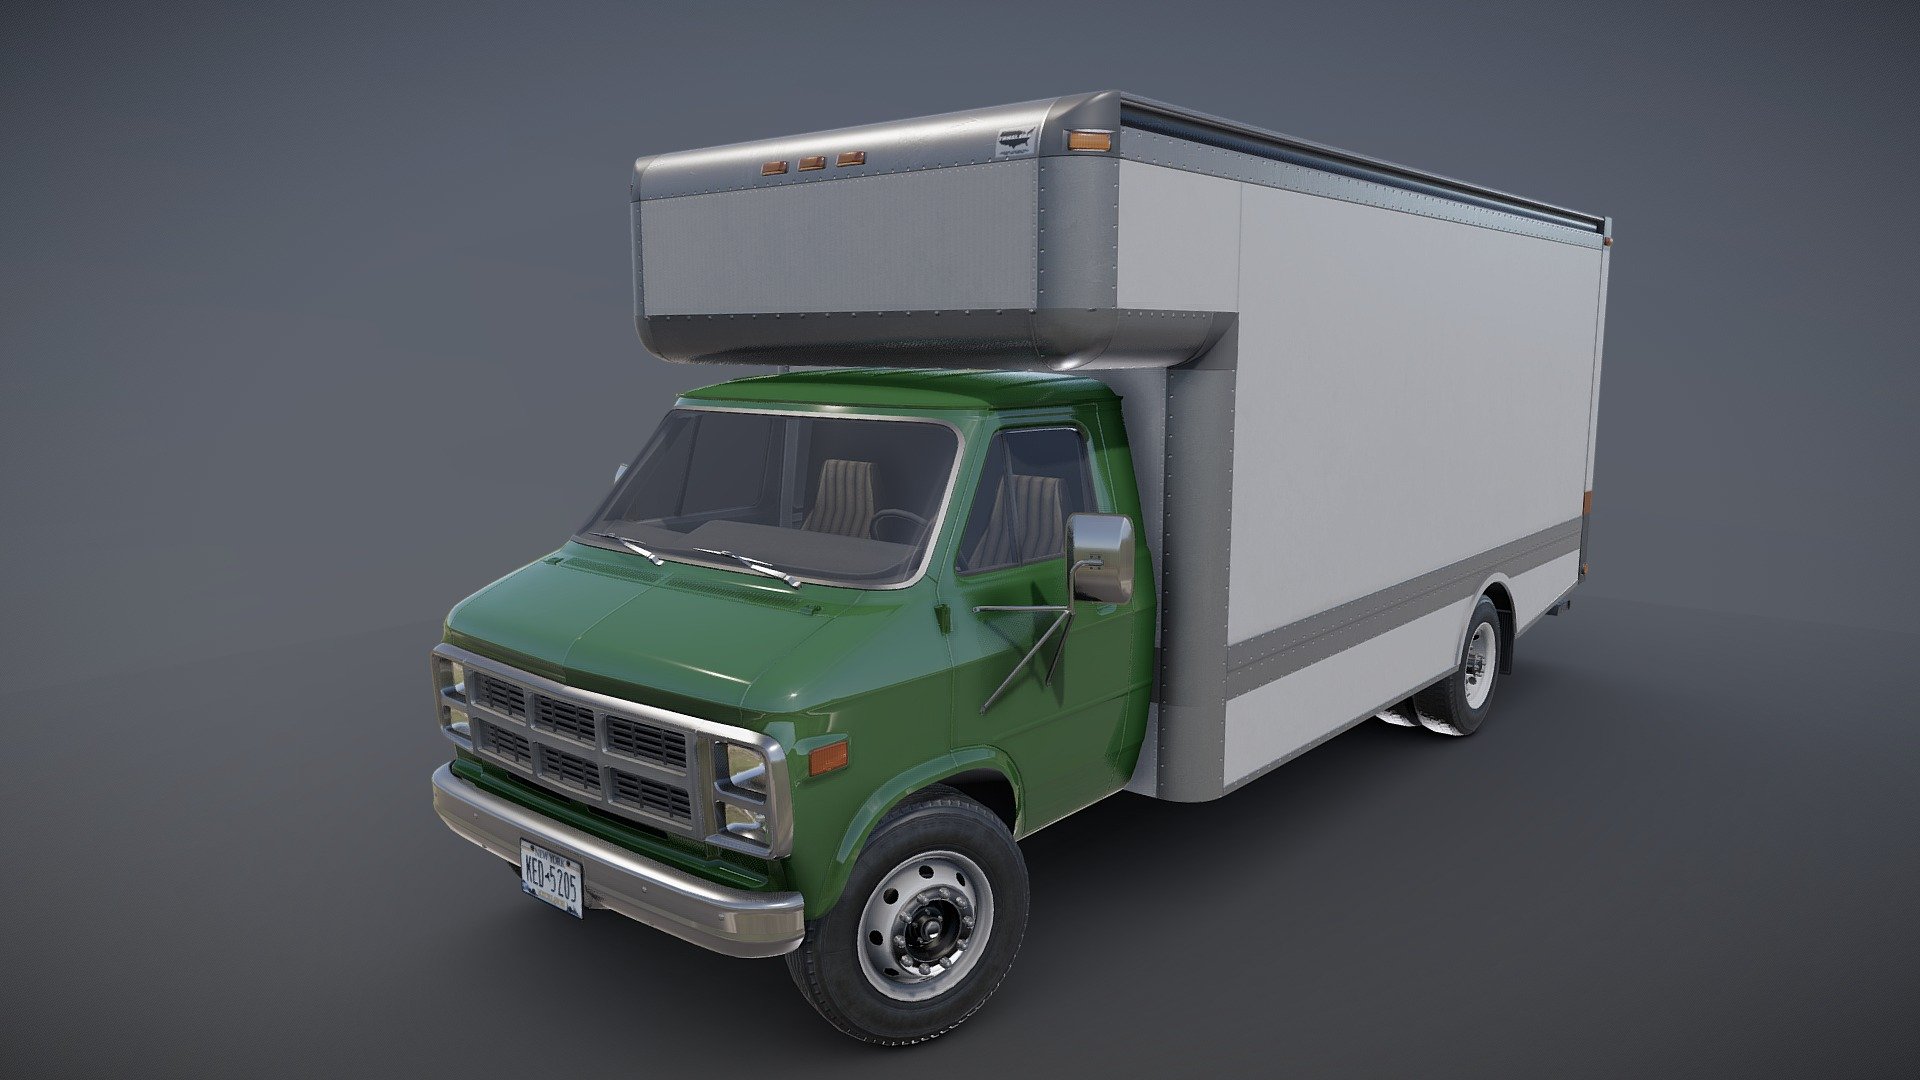 Moving box van game ready model.

Full textured model with clean topology.

High accuracy exterior model

Different tires for rear and front wheels.

Full model - 46518 tris 27387 verts

Lowpoly interior - 1739 tris 1041 verts

Wheels - 13350 tris 7762 verts

High detailed rims and tires, with PBR maps(Base_Color/Metallic/Normal/Roughness.png2048x2048 )

Original scale. Lenght 7,2 m, width 2,6 m, height 2,9 m.

Model ready for real-time apps, games, virtual reality and augmented reality.

Asset looks accuracy and realistic and become a good part of your project 3d model